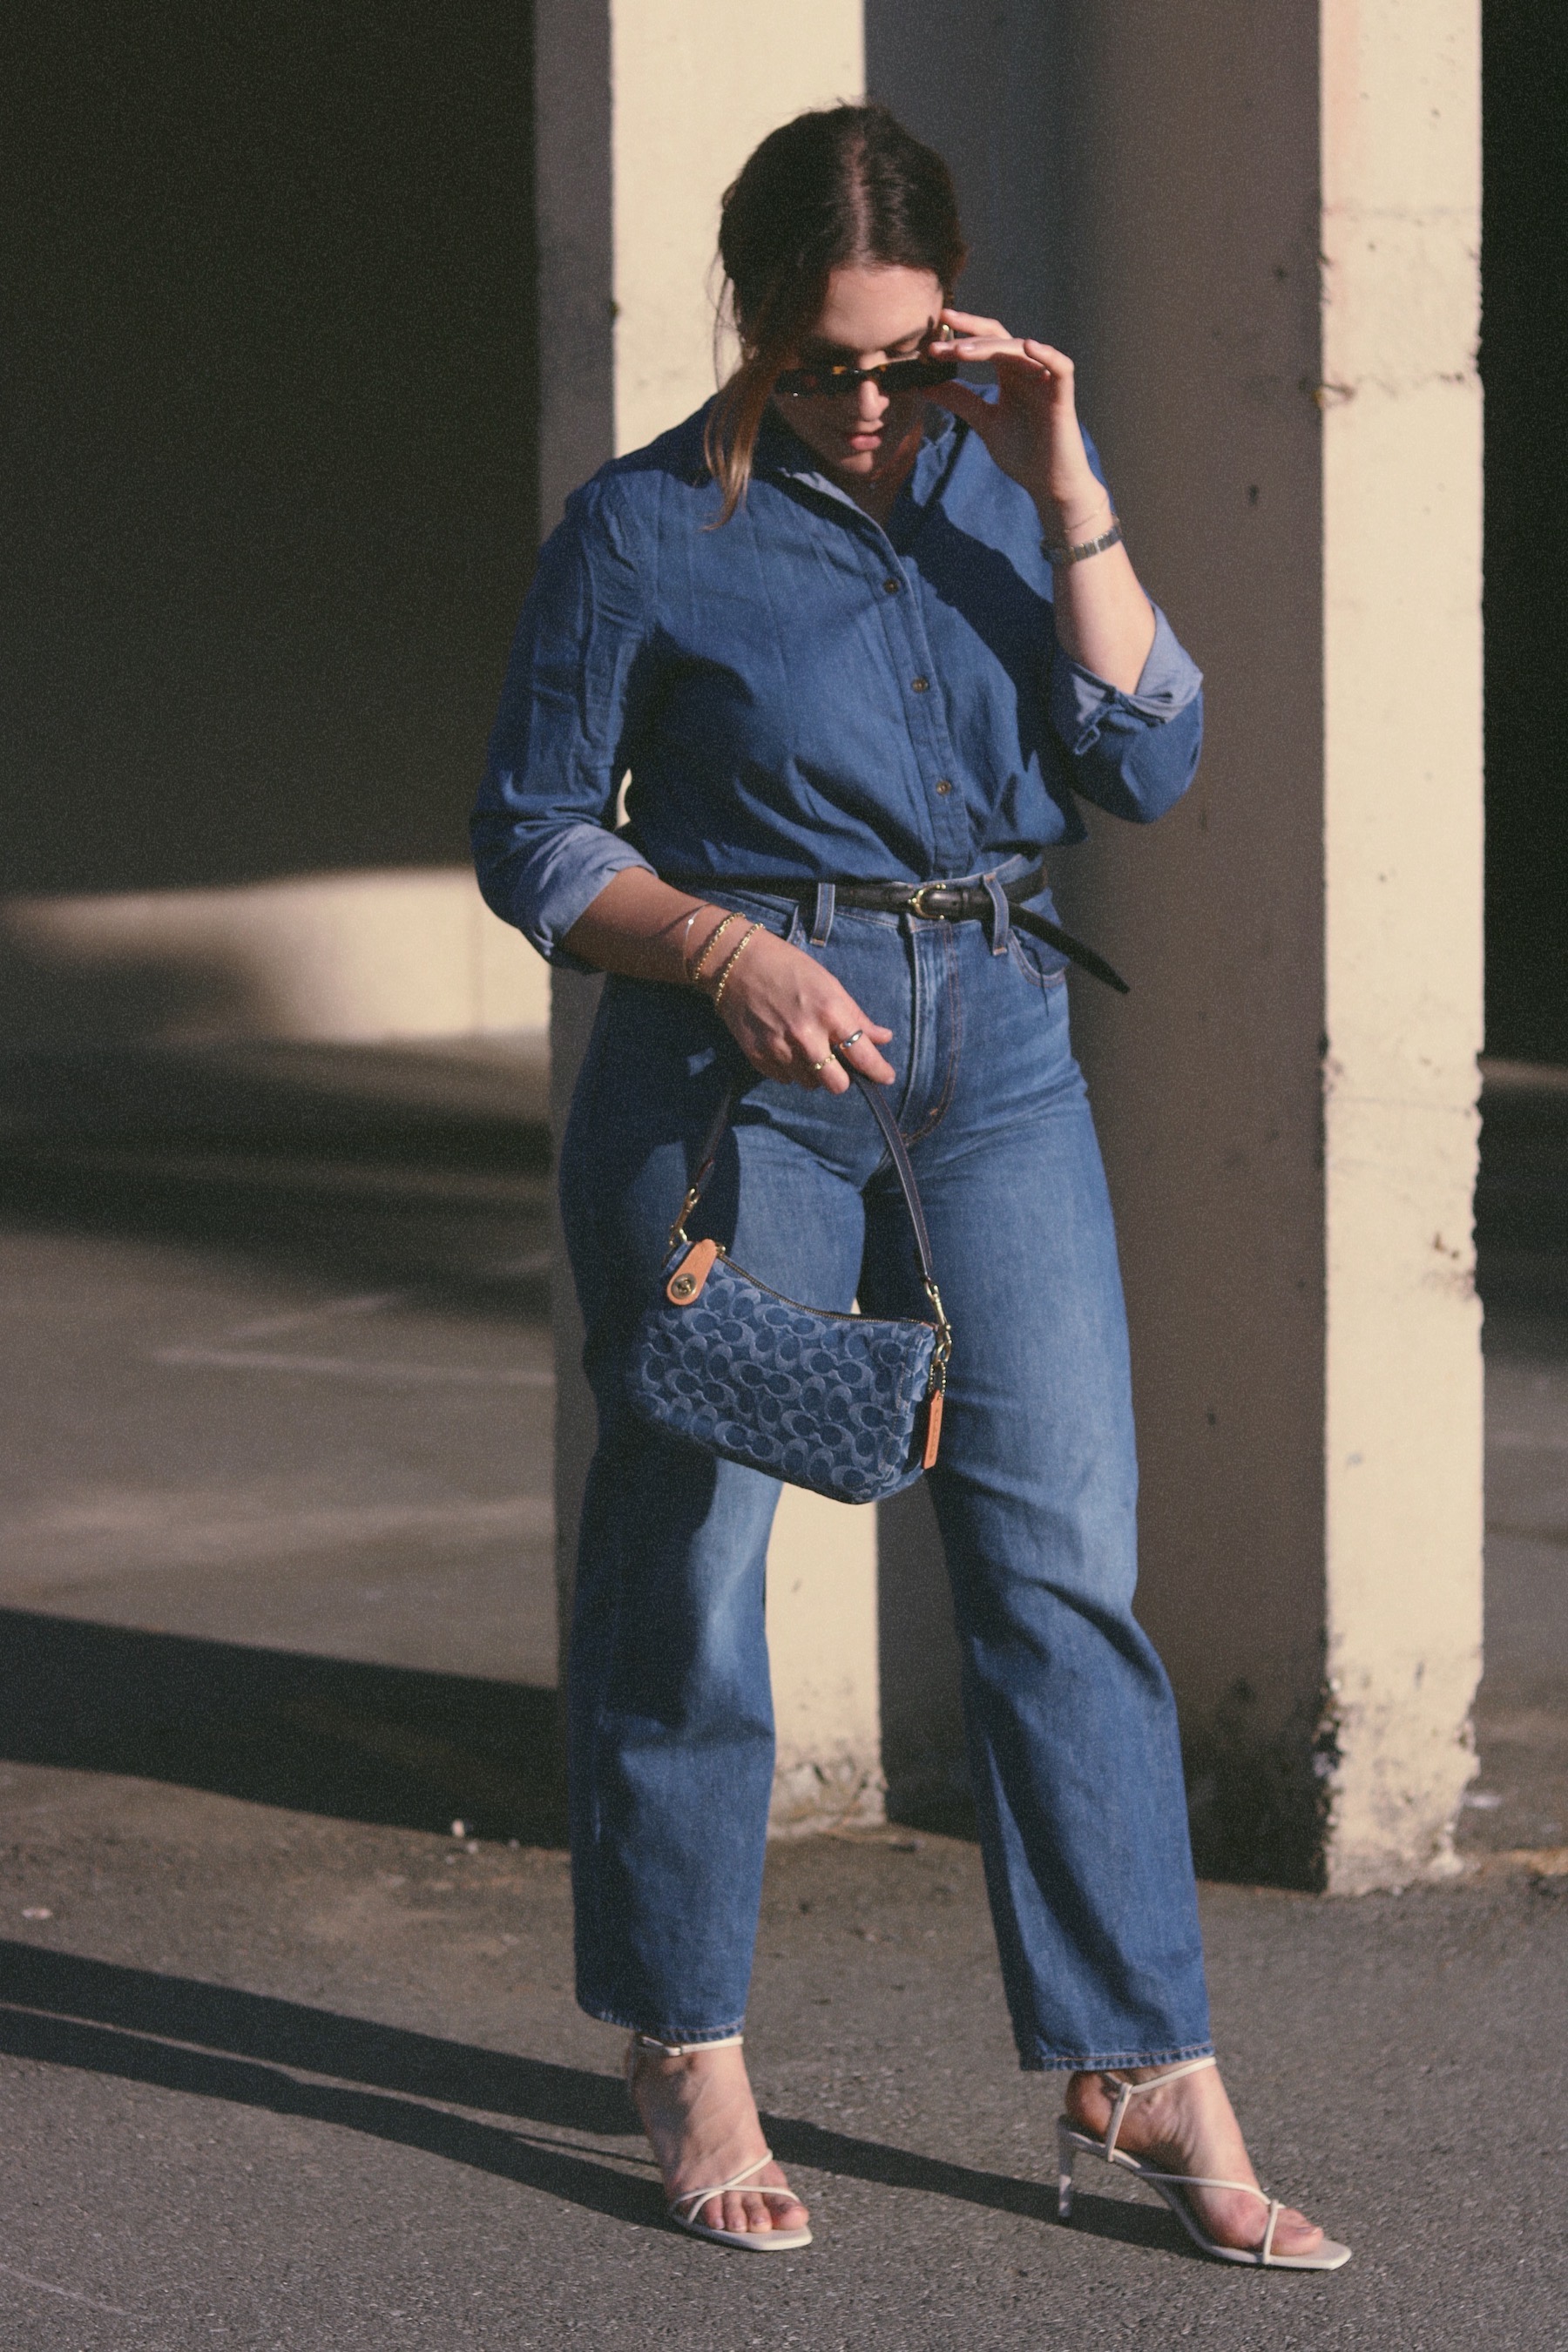 Denim on denim on denim is a layered look I'm here for — Covet & Acquire